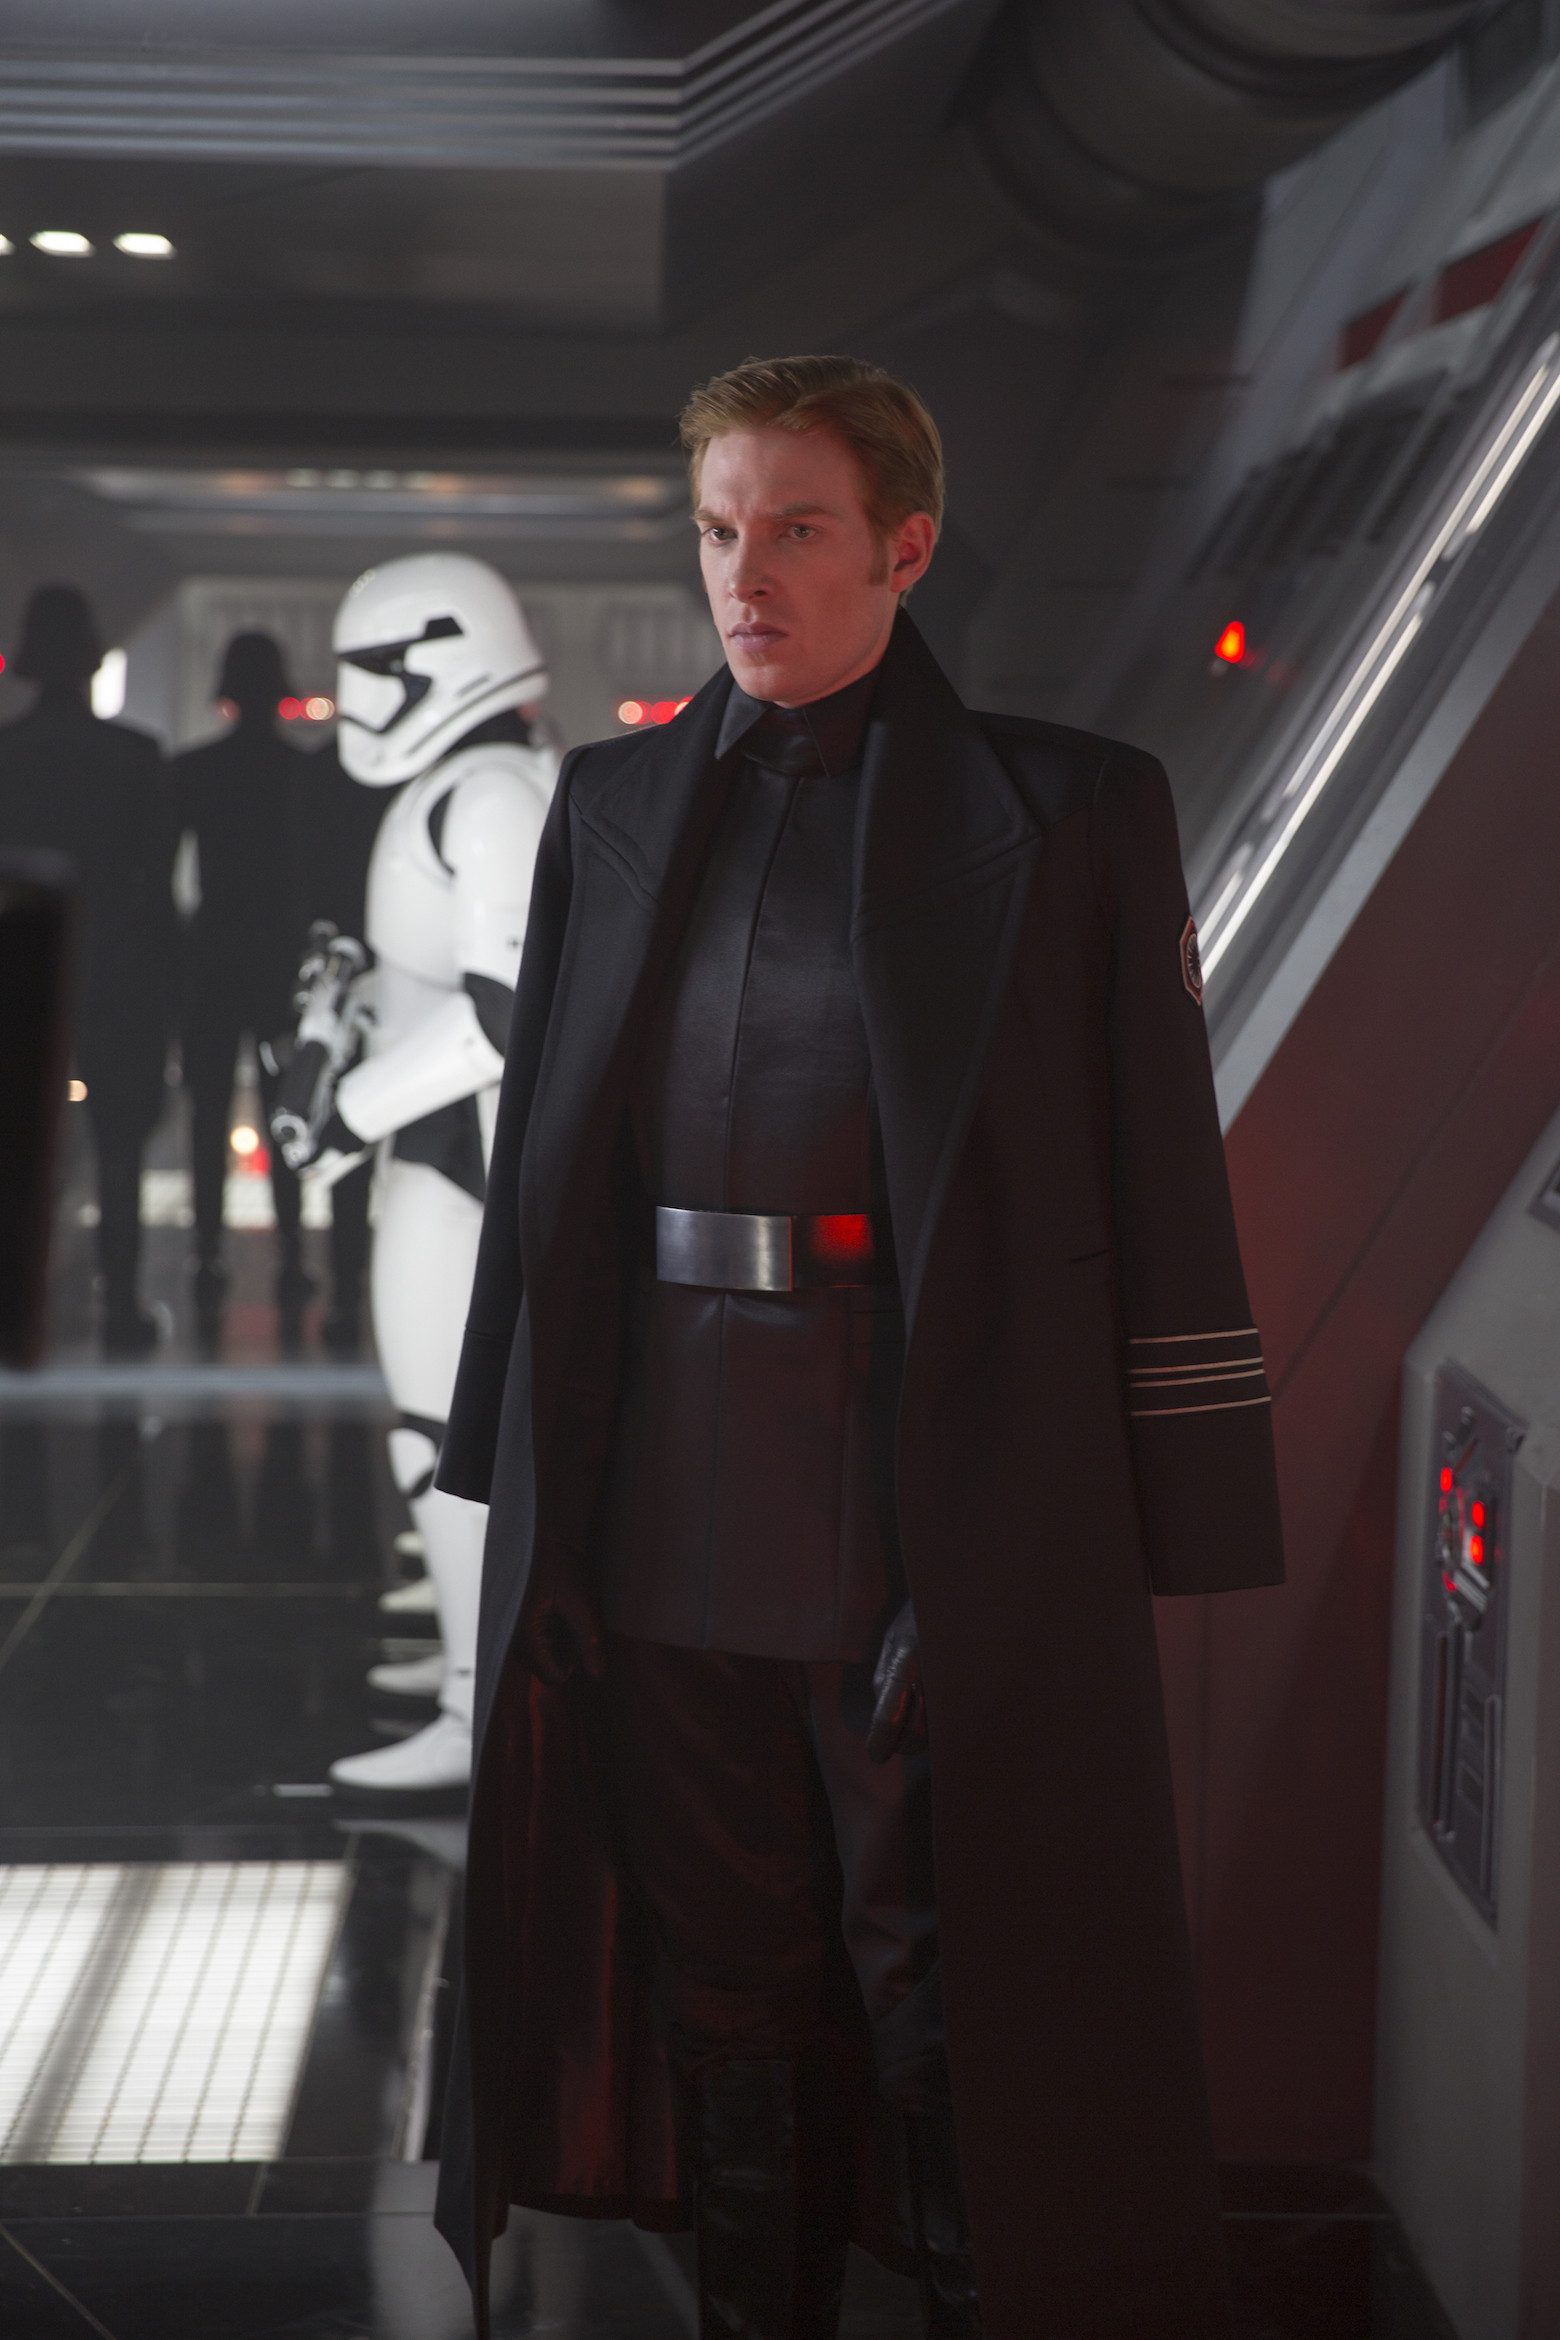 General Hux of the First Order Star Wars 7